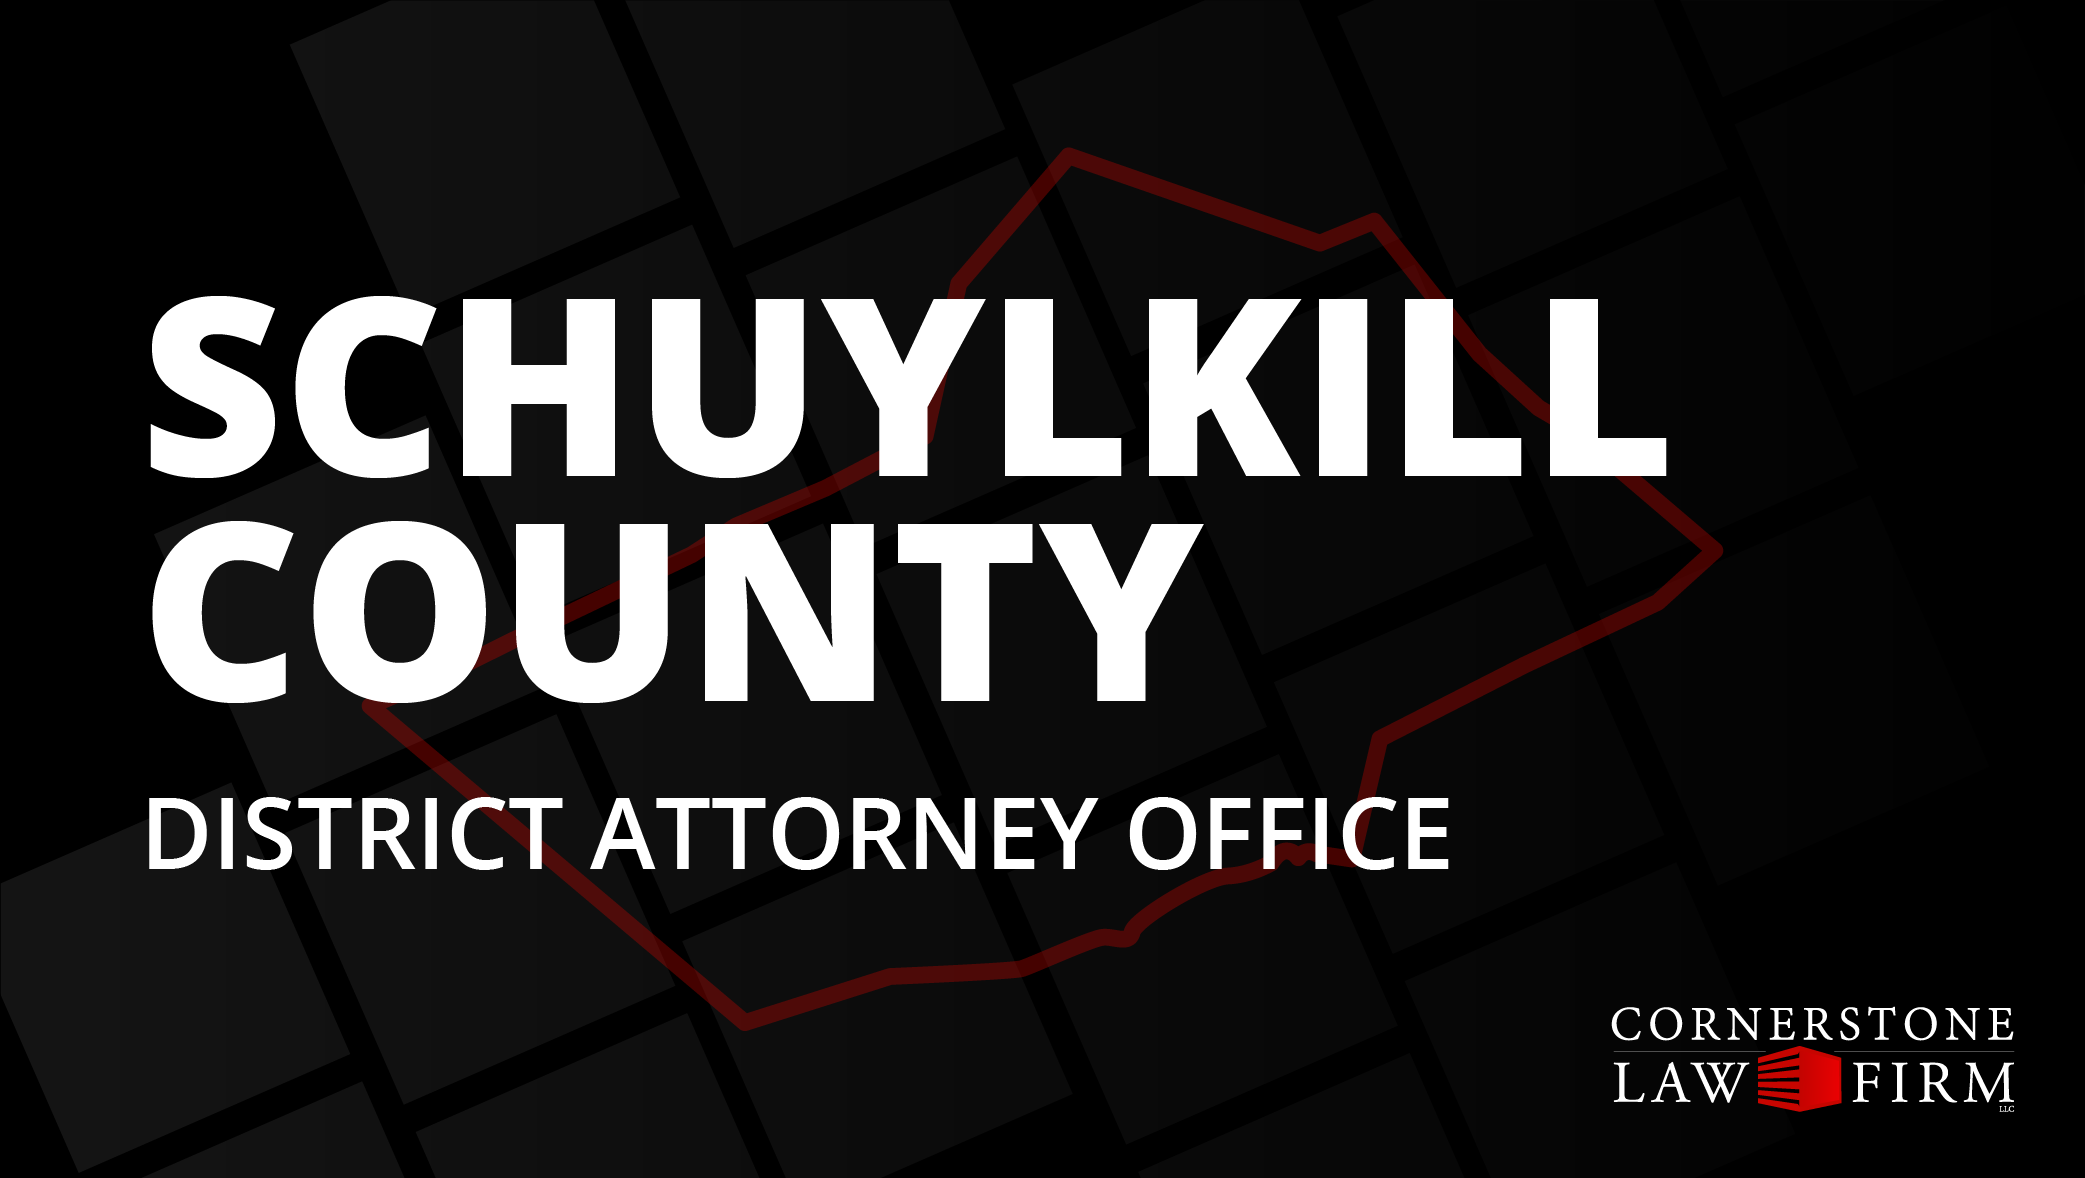 The words "Schuylkill County District Attorney Office" over a black background with a faded red outline of the county.